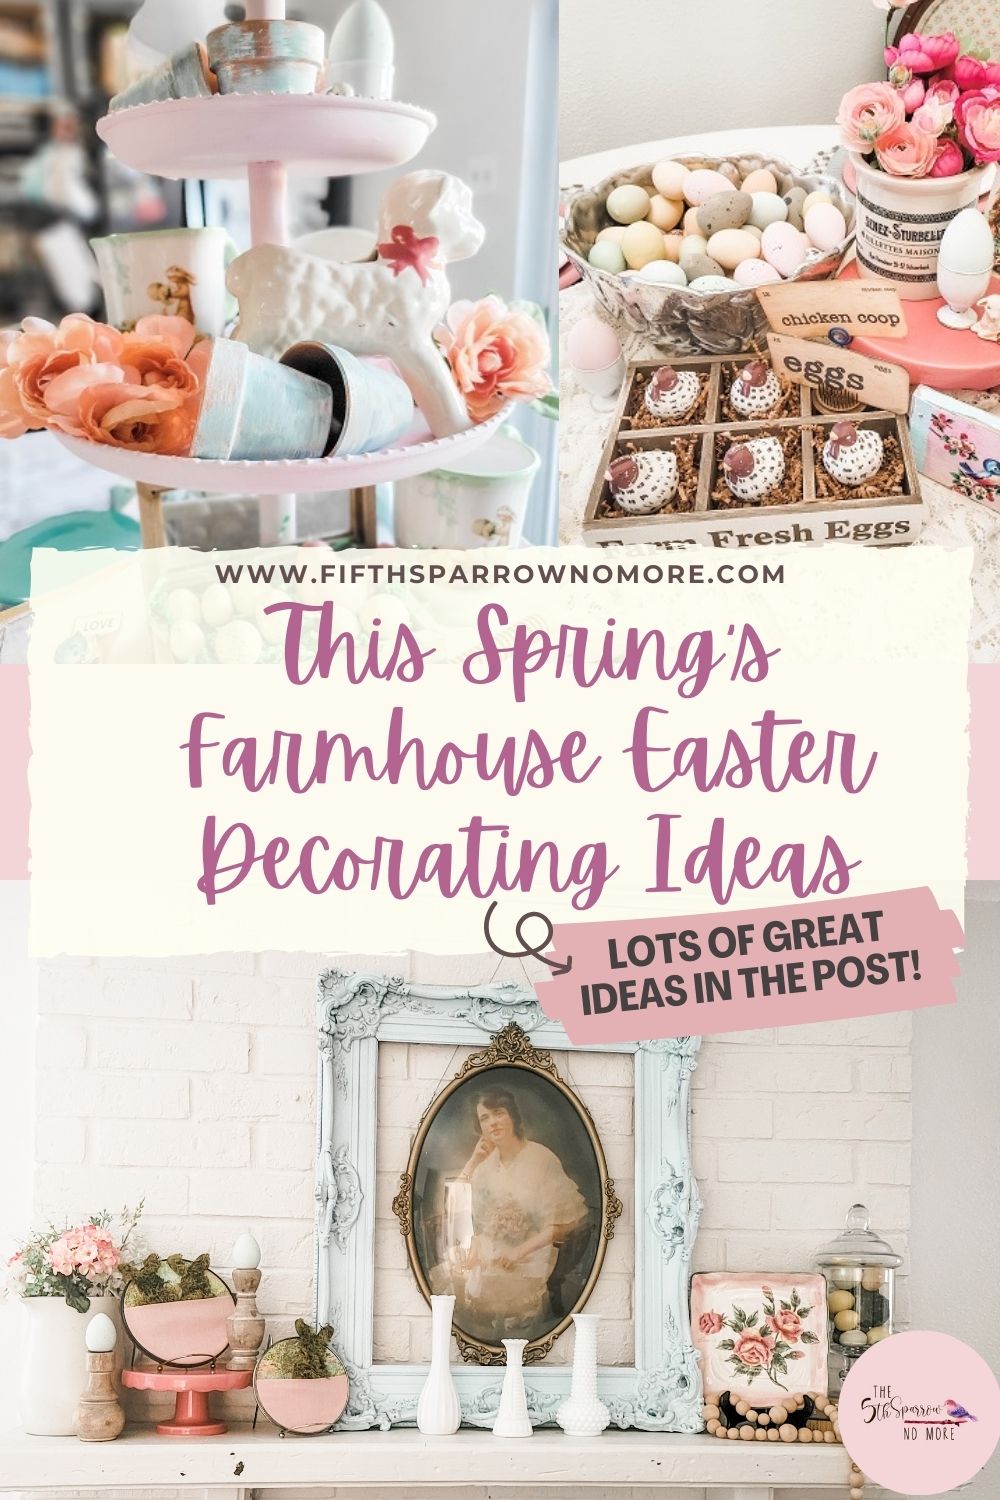 For this blog post I'm sharing some of the best farmhouse Easter decorating ideas for this Spring for mantels, tiered trays, tables and more.